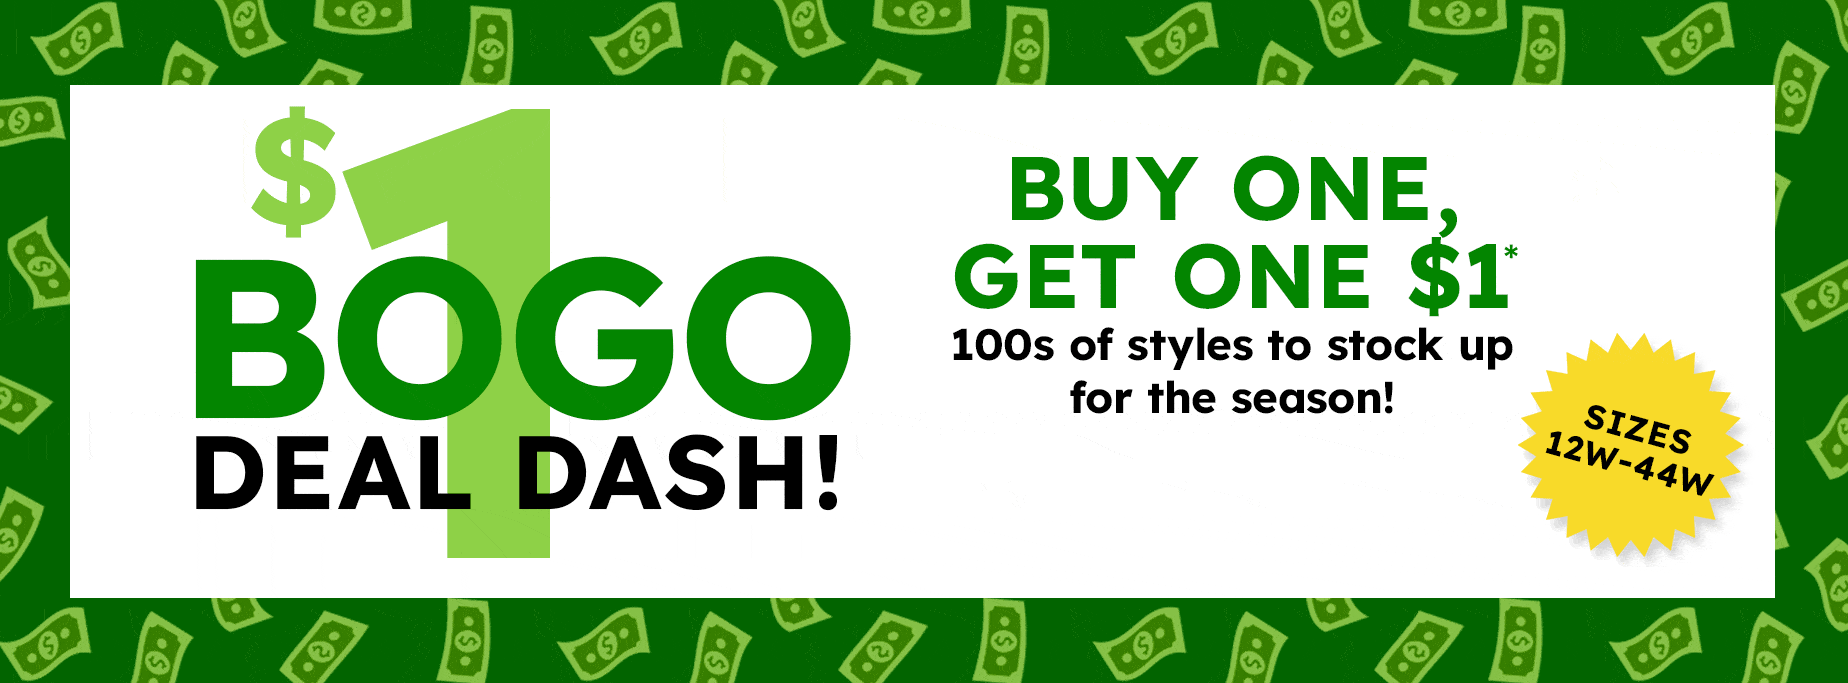 BOGO deal dash! buy one get one $1 00s of styles to stock up for the season! shop the sale